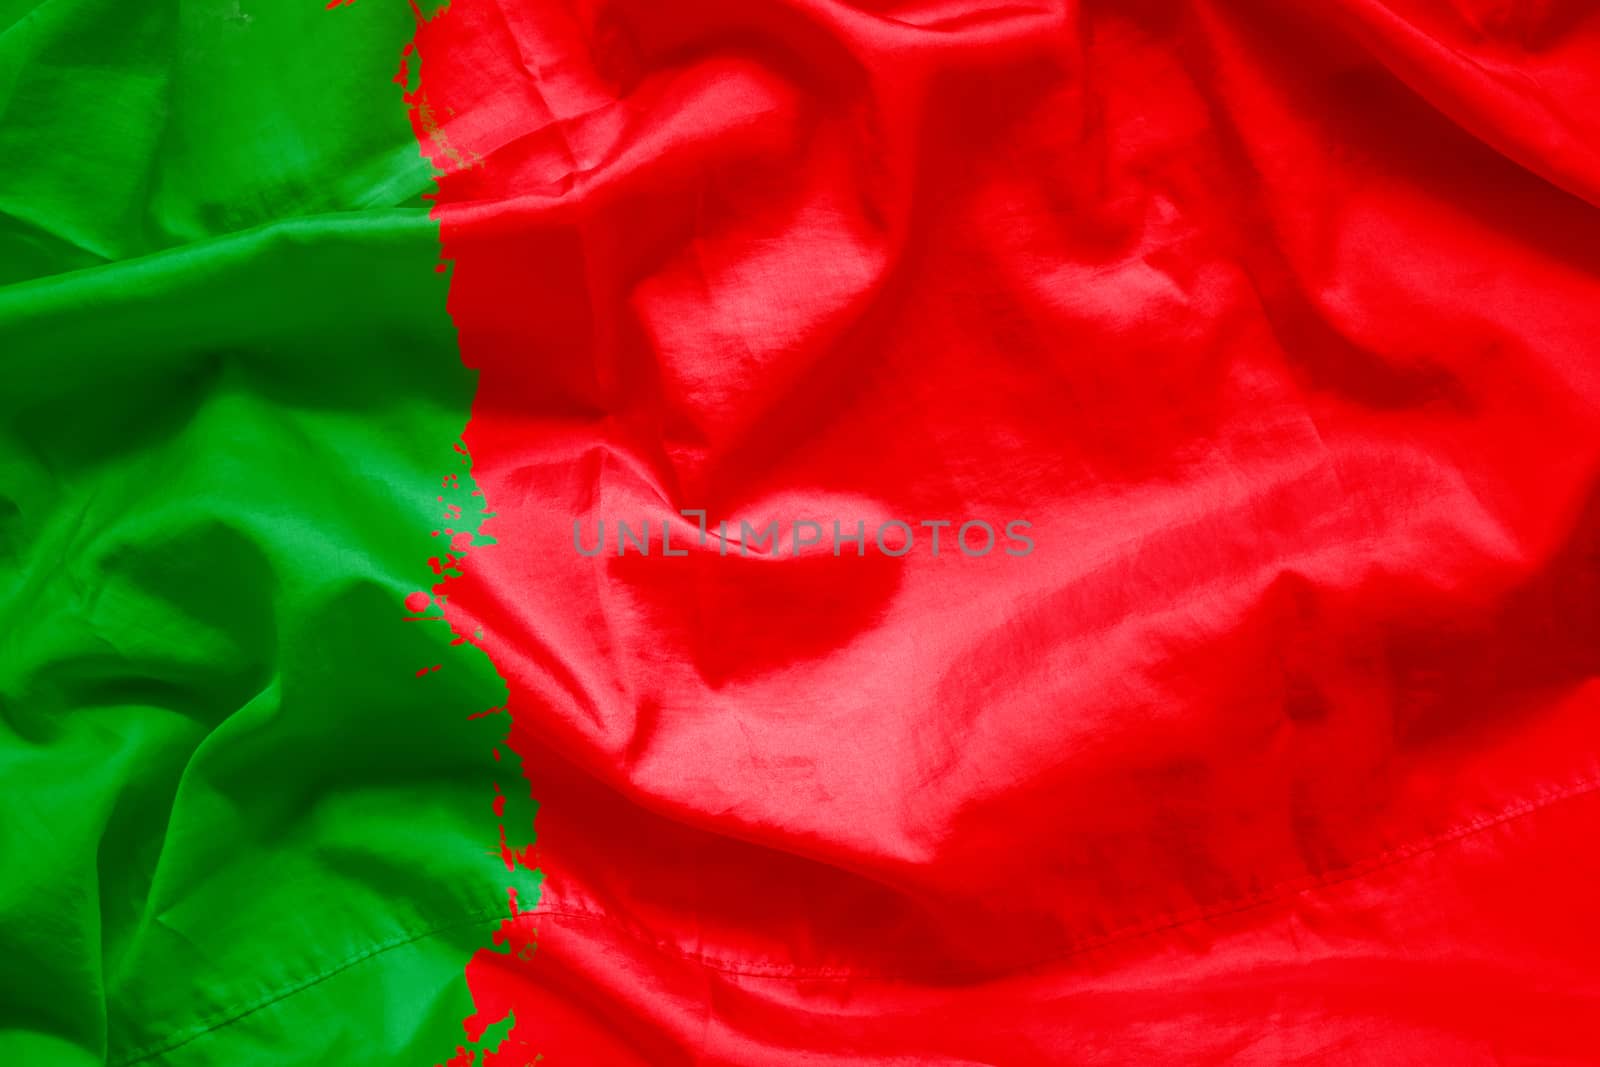 Flag of Portugal (Portuguese Republic) by watercolor paint brush on canvas fabric, grunge style